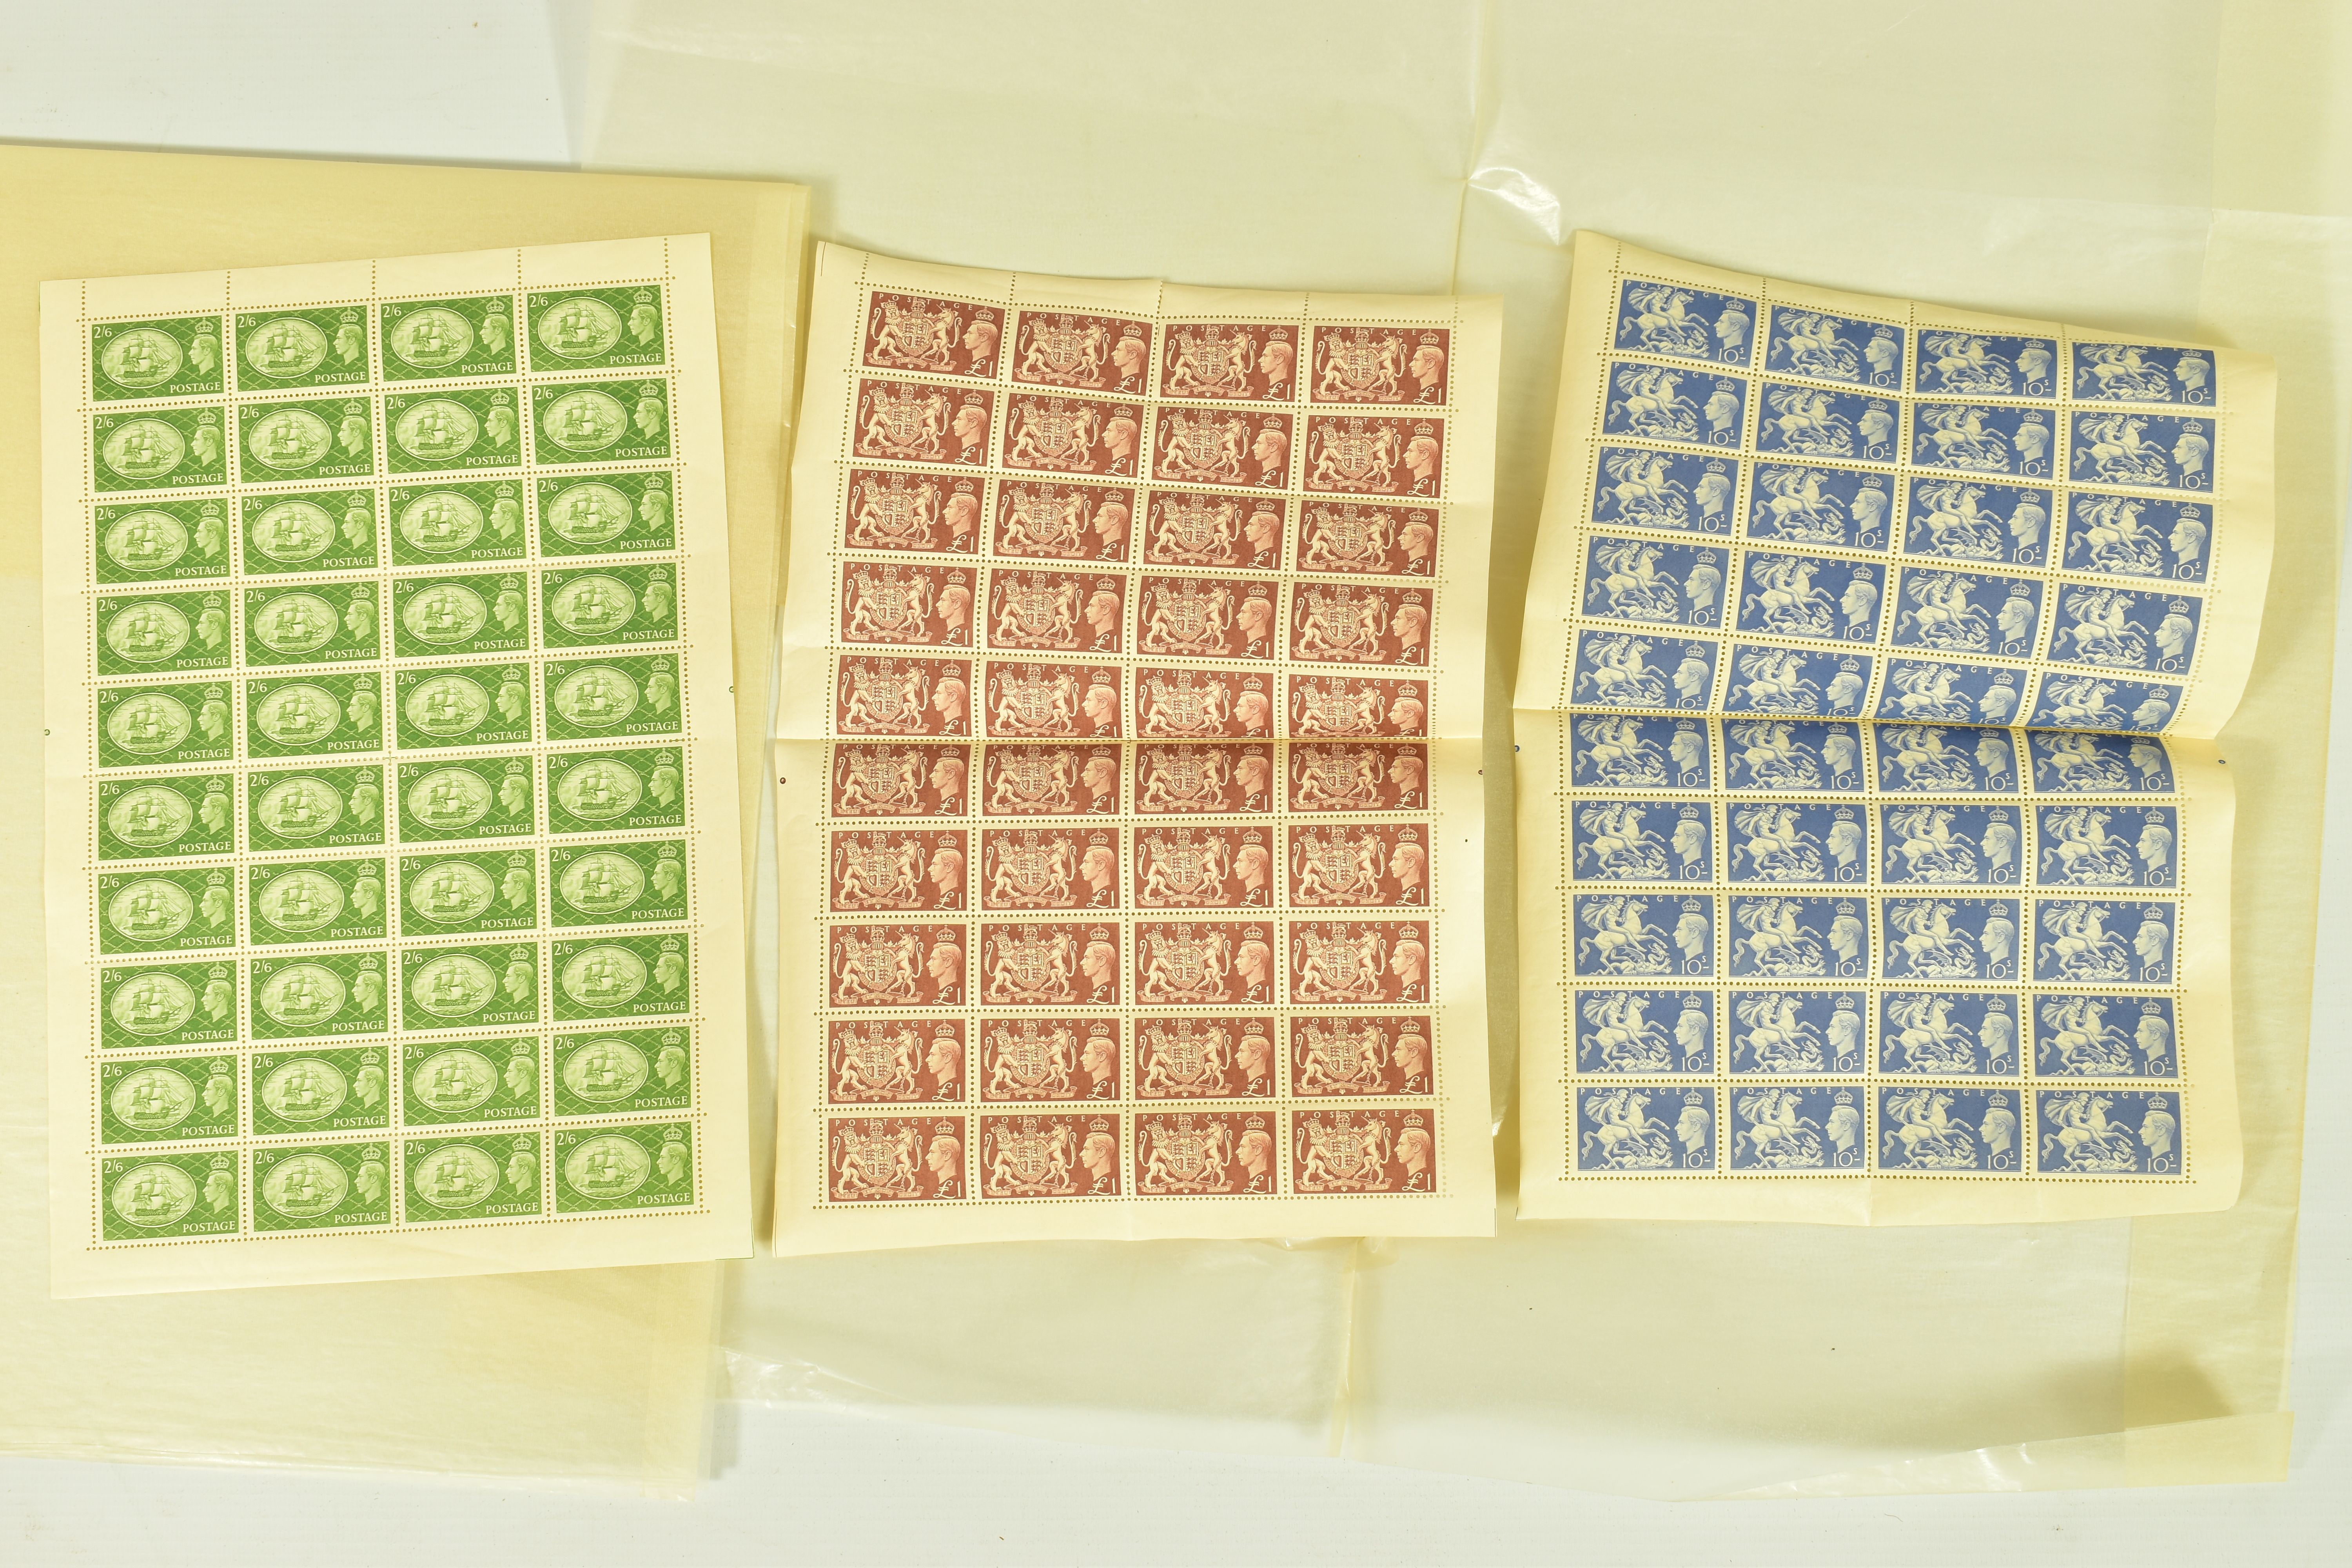 GB KGVI 1951 festival high values 2/6, 10s and £1 all in complete Sheets. rare thus.